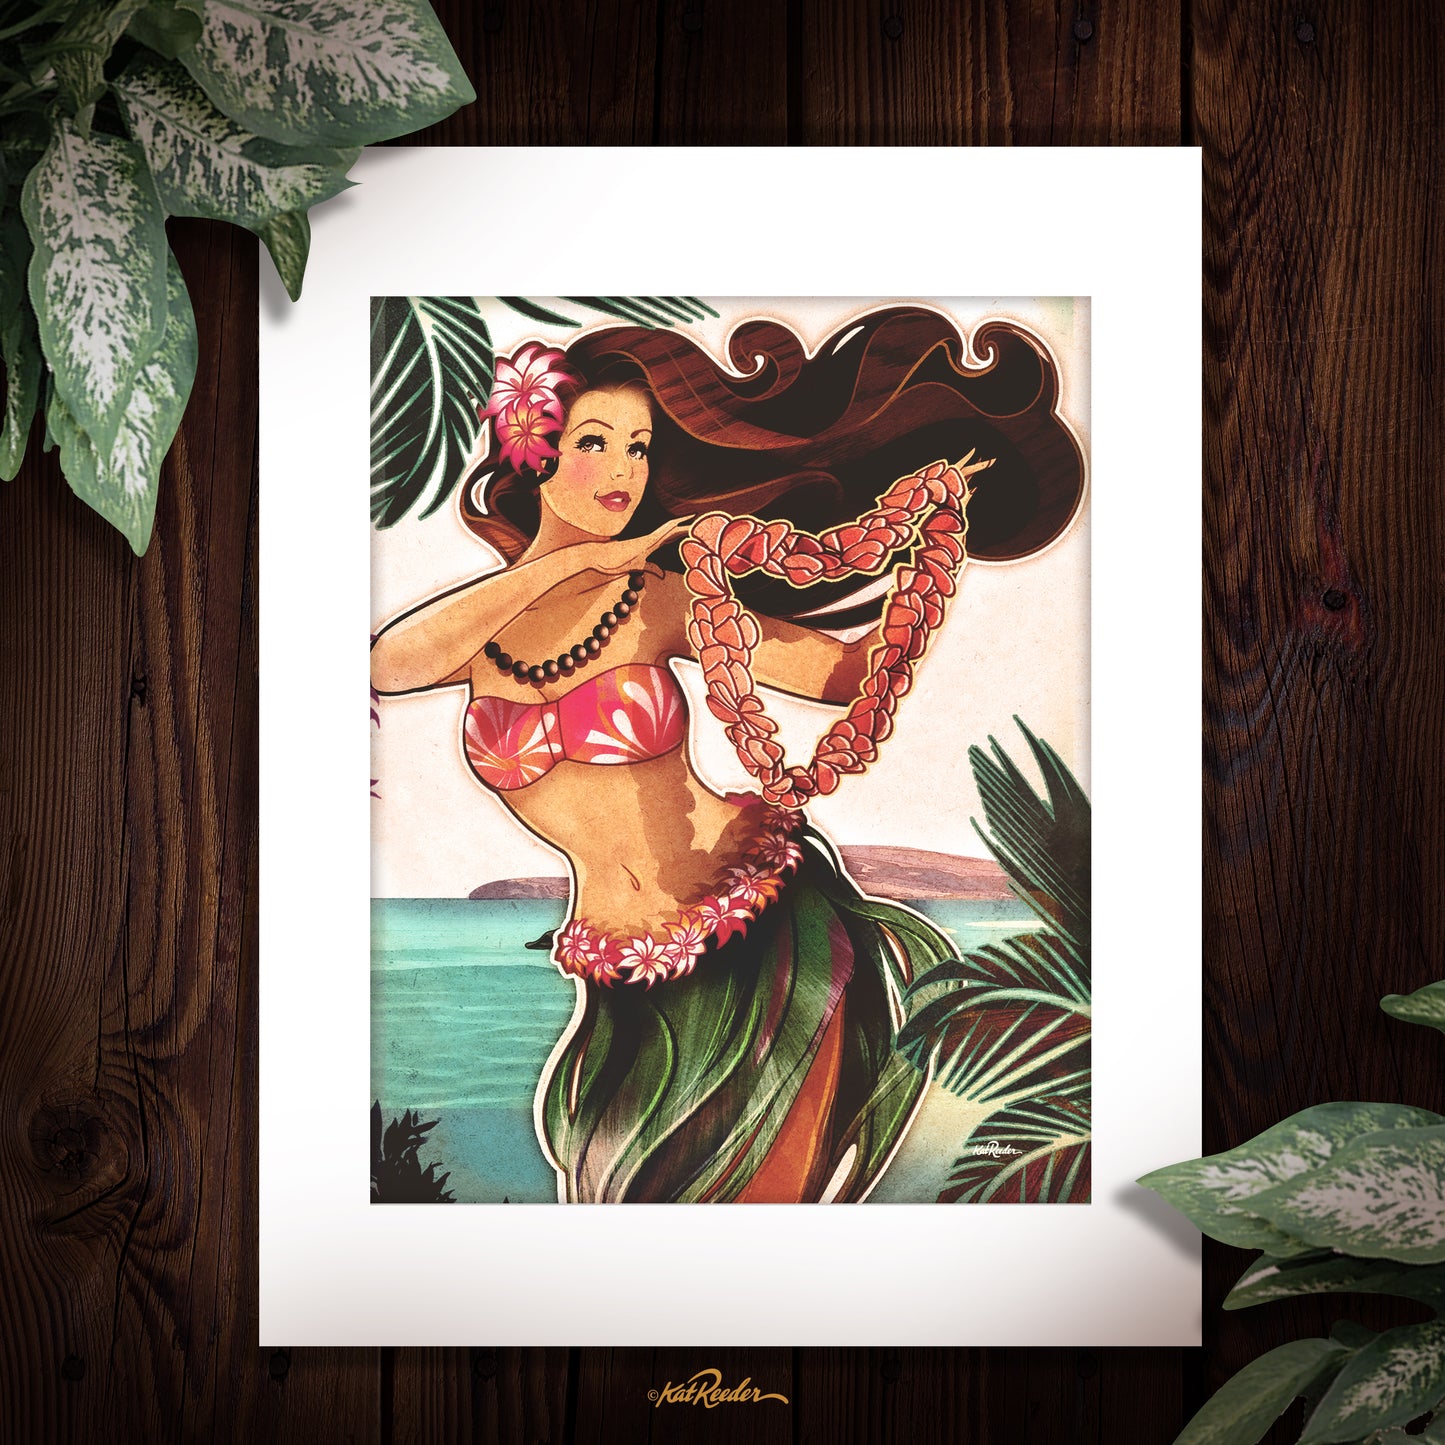 vintage style illustration of a hula dancer holding a lei with big hair blowing in the wind with a beach backdrop